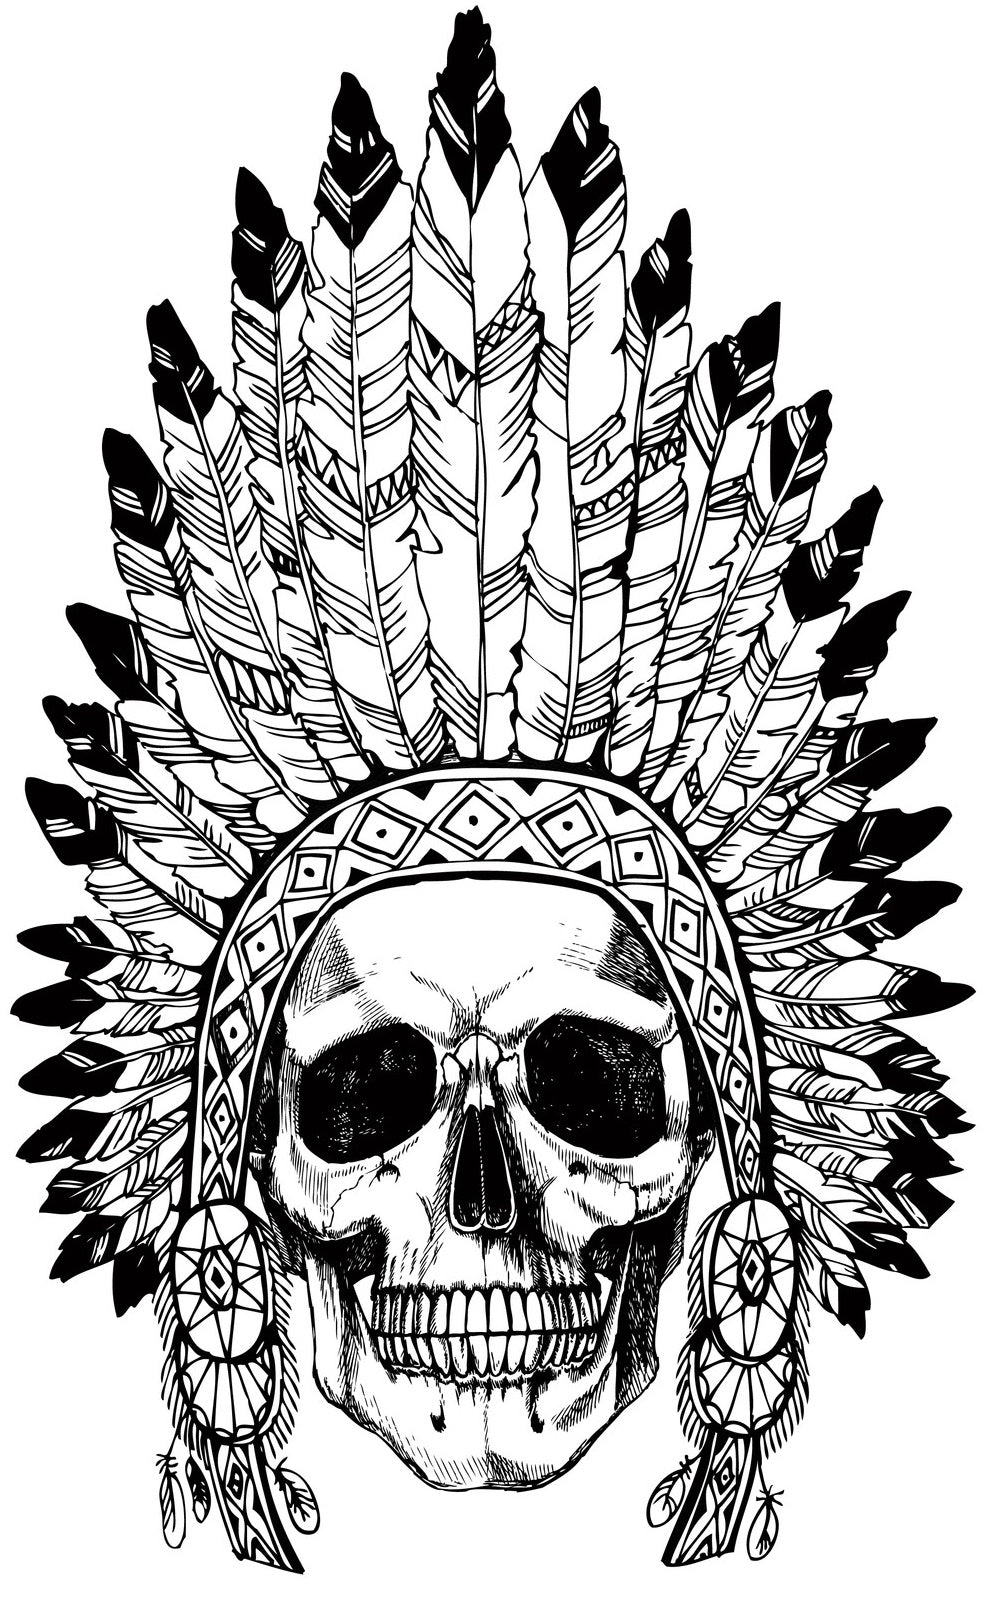 The Chief Of Skulls Coloring (PDF Book) - 30 Native American Skulls With Headdress